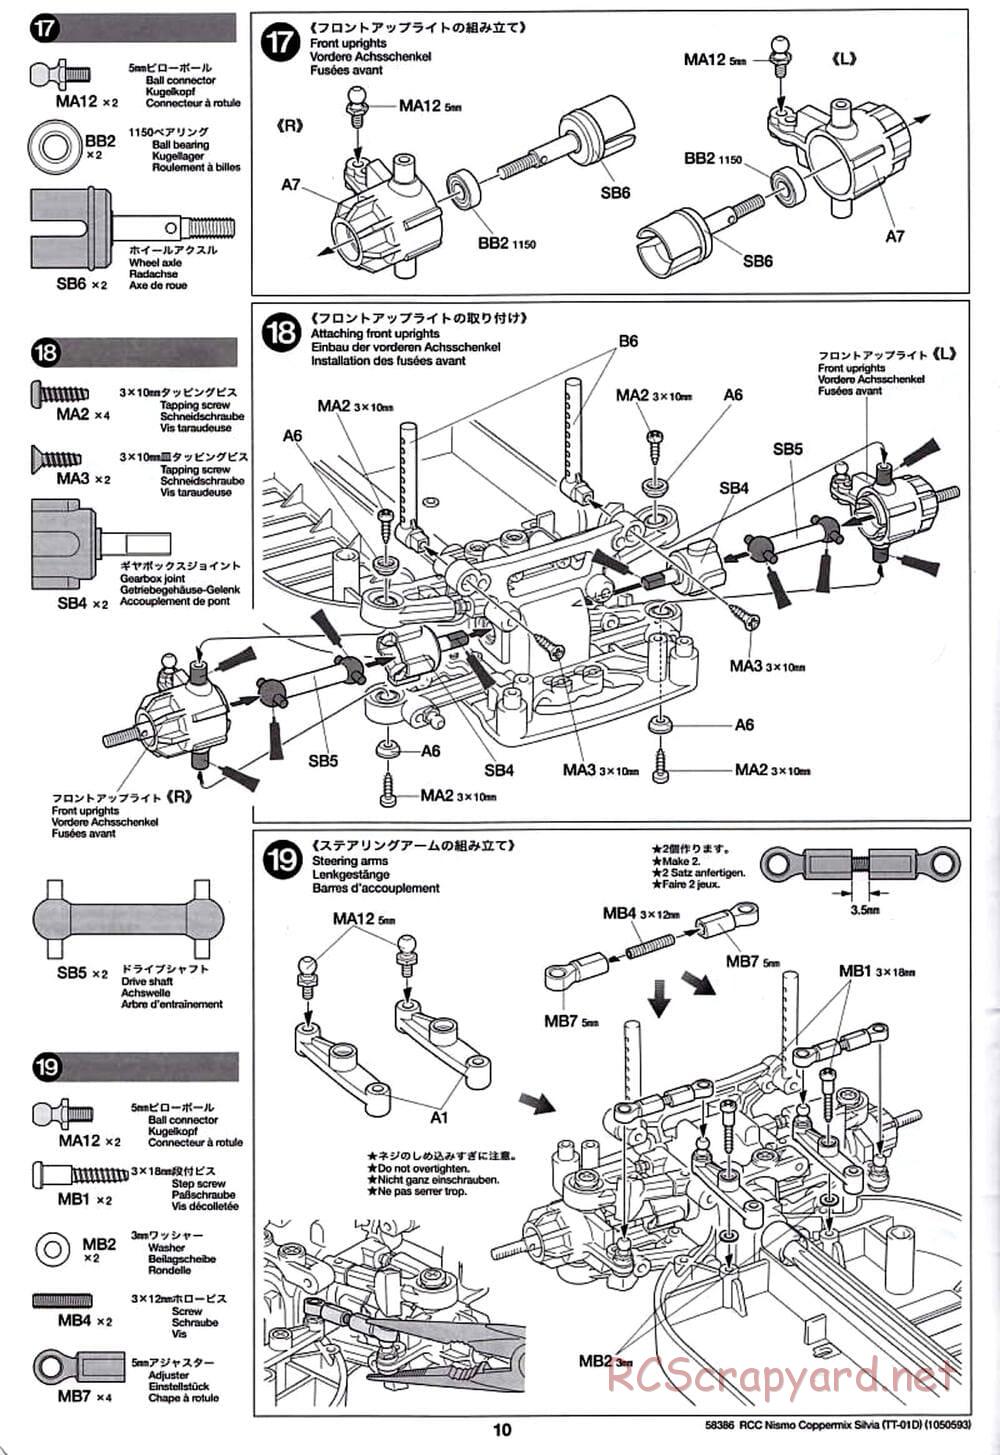 Tamiya - Nismo Coppermix Silvia Drift Spec - TT-01D Chassis - Manual - Page 10